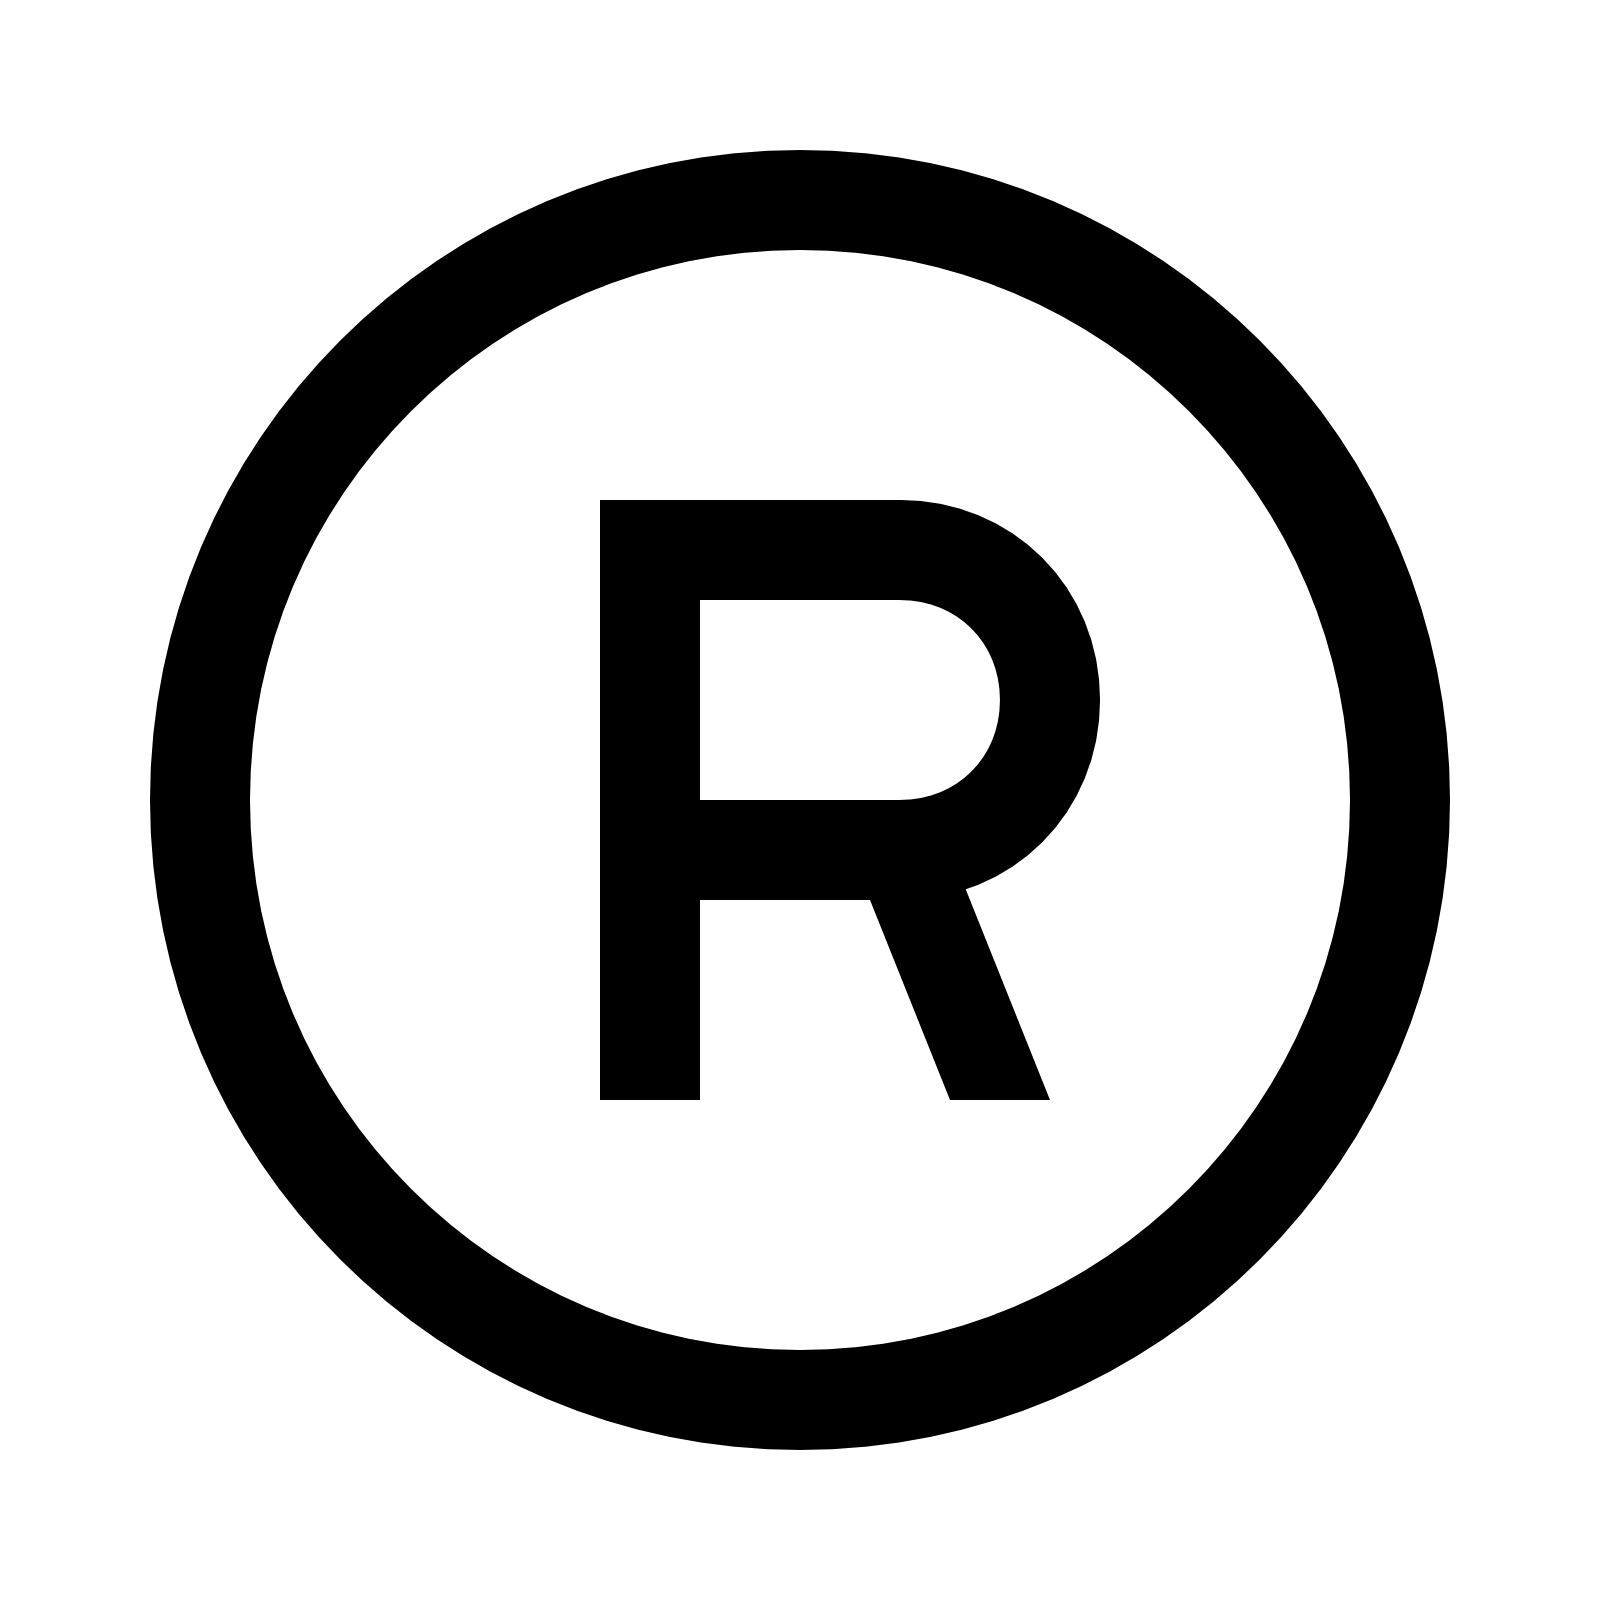 Copyright Logo - trademark vs copyright. Copyright or Trademark. Learn the Difference